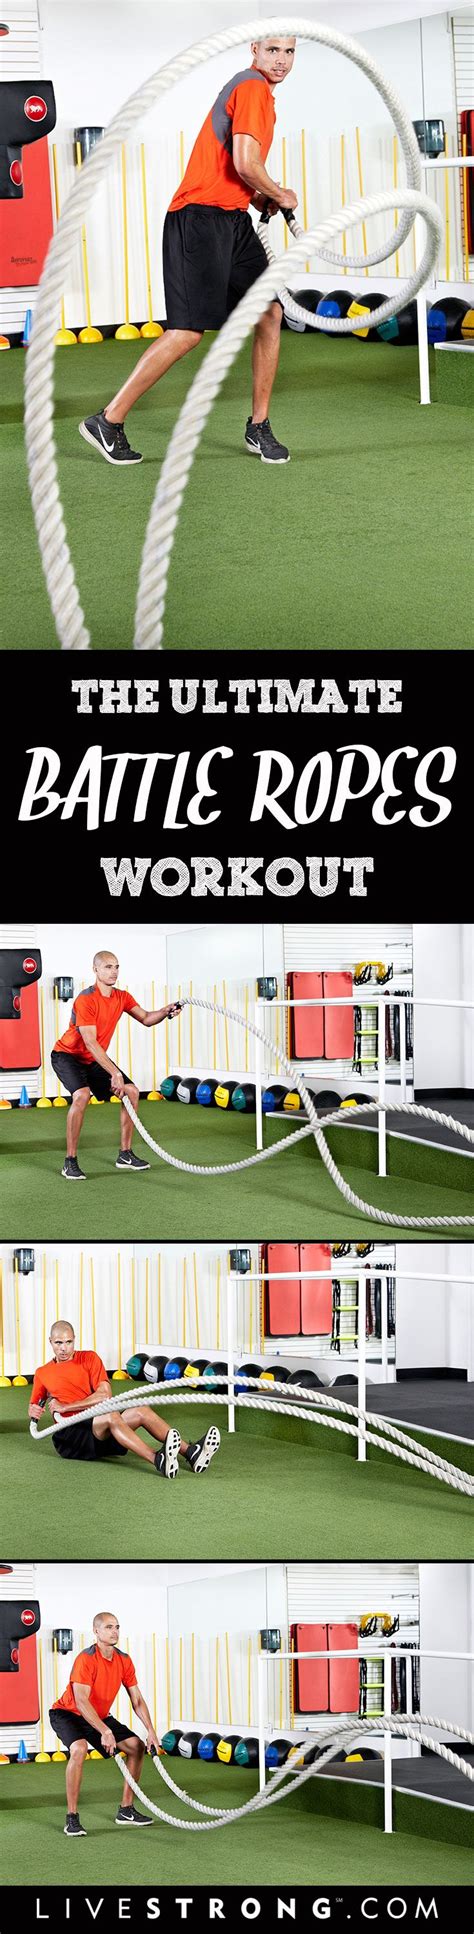 Of The Most Challenging Battle Ropes Exercises Livestrong Com